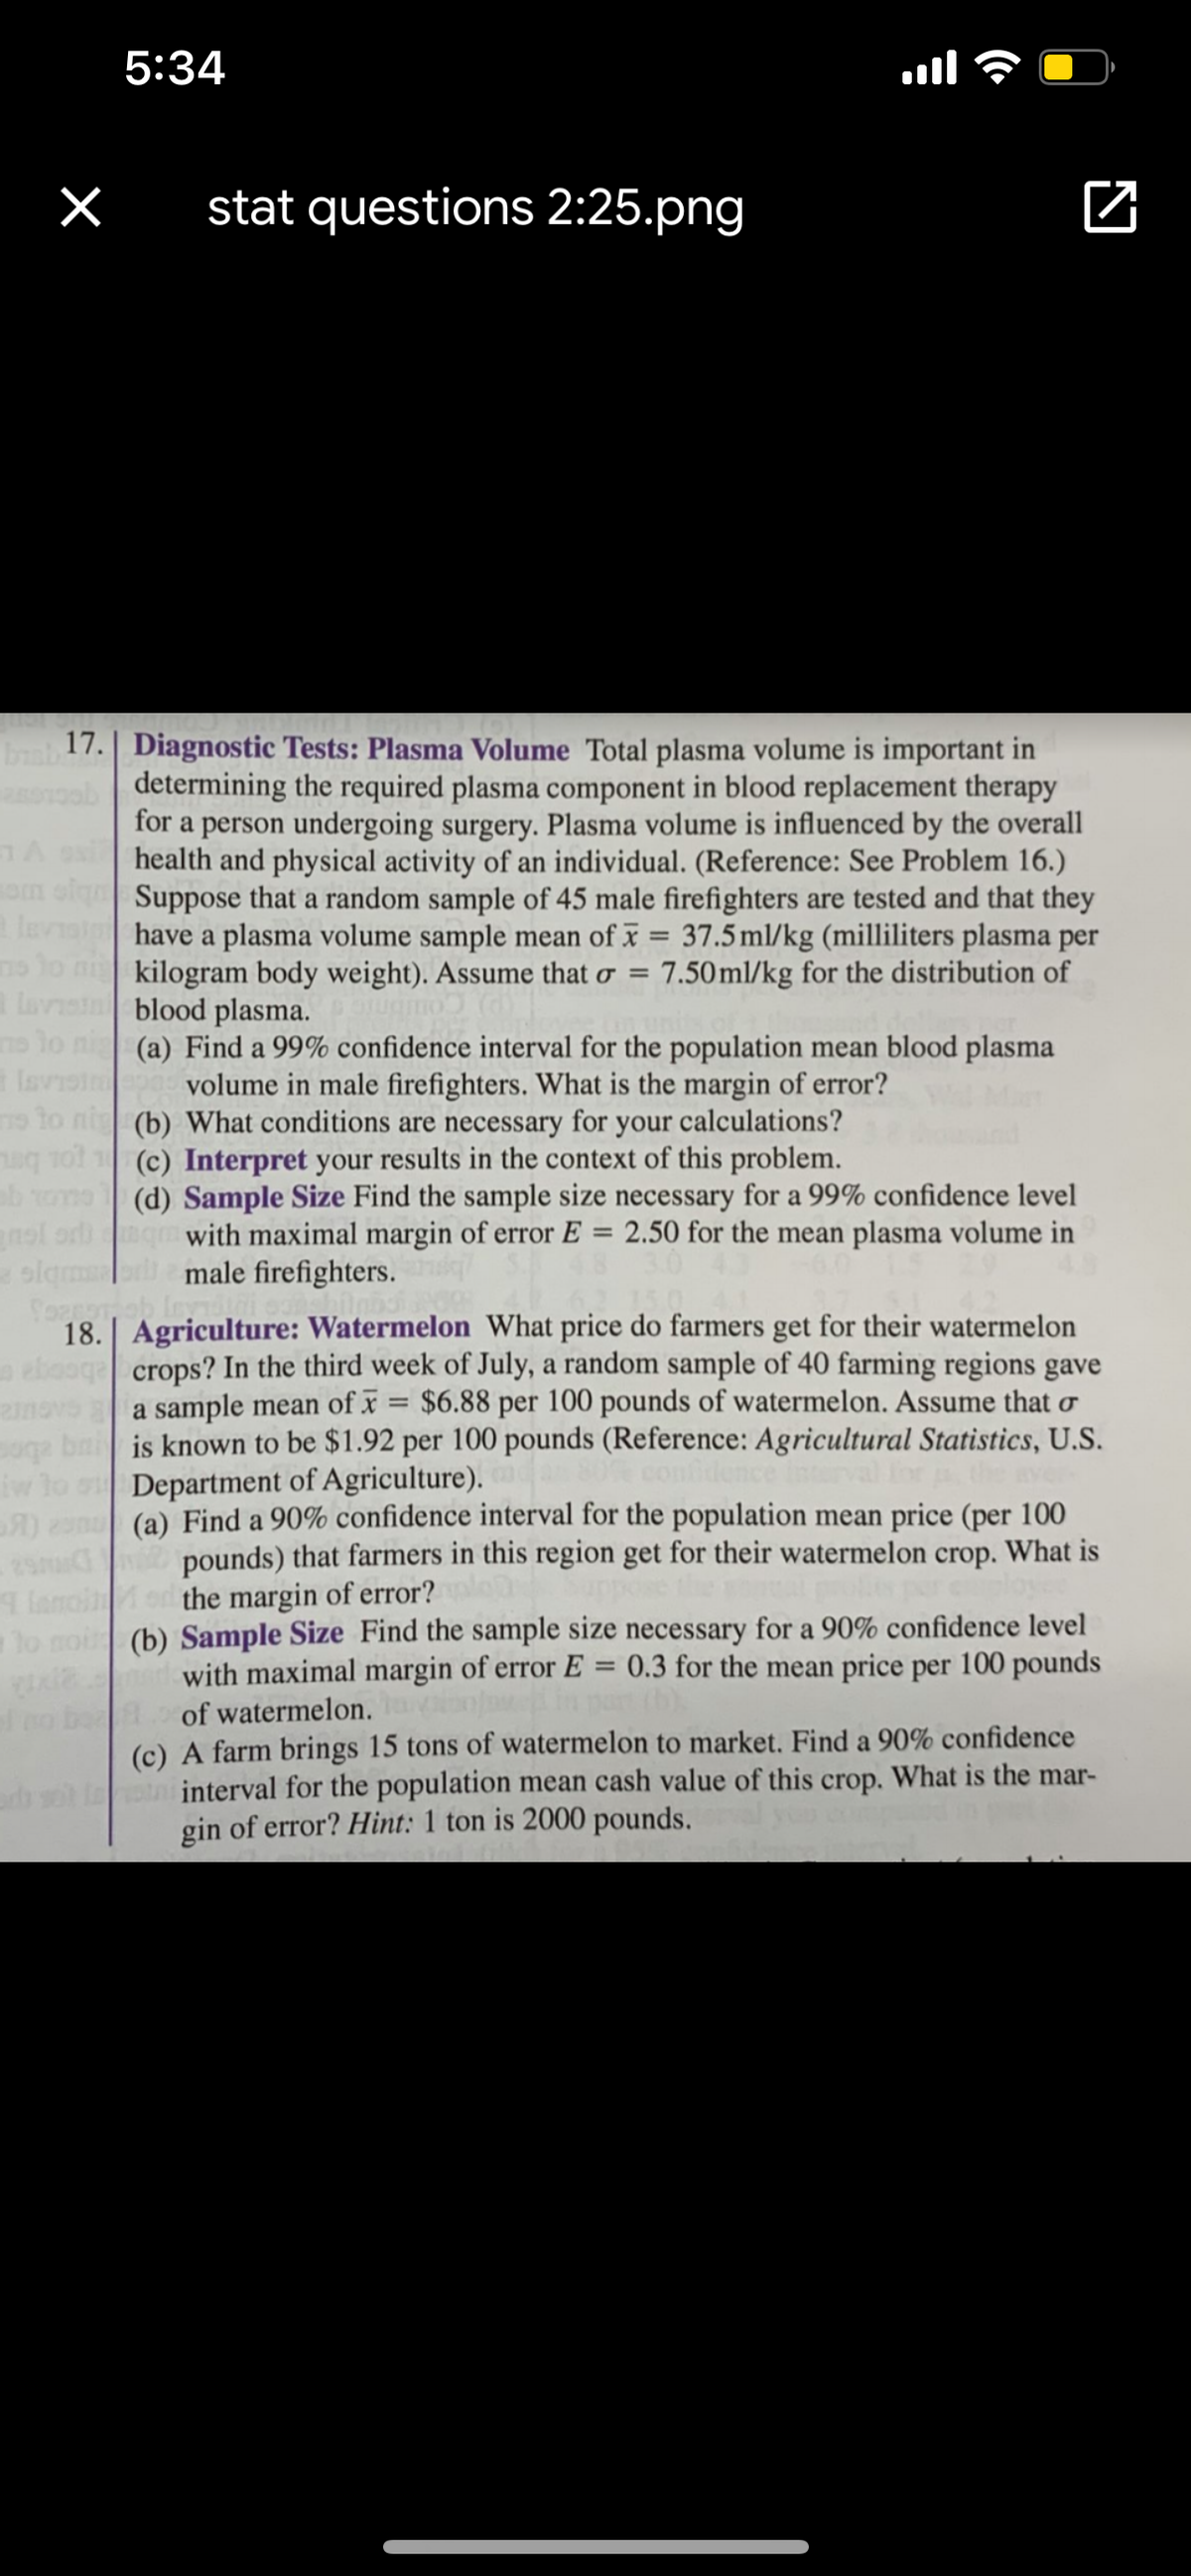 5:34
stat questions 2:25.png
a 17.| Diagnostic Tests: Plasma Volume Total plasma volume is important in
determining the required plasma component in blood replacement therapy
for a person undergoing surgery. Plasma volume is influenced by the overall
health and physical activity of an individual. (Reference: See Problem 16.)
om sl Suppose that a random sample of 45 male firefighters are tested and that they
leviaihave a plasma volume sample mean of x = 37.5ml/kg (milliliters plasma per
%3D
no lo ni kilogram body weight). Assume that o =
a lavsin blood plasma.
7.50 ml/kg for the distribution of
no lo ni (a) Find a 99% confidence interval for the population mean blood plasma
volume in male firefighters. What is the margin of error?
Isvis
o to nig (b) What conditions are necessary for your calculations?
(c) Interpret your results in the context of this problem.
(d) Sample Size Find the sample size necessary for a 99% confidence level
with maximal margin of error E = 2.50 for the mean plasma volume in
nsl or
olan
male firefighters.
18.| Agriculture: Watermelon What price do farmers get for their watermelon
ebaoge crops? In the third week of July, a random sample of 40 farming regions gave
a sample mean of x
bai is known to be $1.92 per 100 pounds (Reference: Agricultural Statistics, U.S.
iw lo s Department of Agriculture).
$6.88 per 100 pounds of watermelon. Assume that o
(a) Find a 90% confidence interval for the population mean price (per 100
pounds) that farmers in this region get for their watermelon crop. What is
the margin of error?
lo noi (b) Sample Size Find the sample size necessary for a 90% confidence level
with maximal margin of error E = 0.3 for the mean price per 100 pounds
in pan h)
lo be
of watermelon.
(c) A farm brings 15 tons of watermelon to market. Find a 90% confidence
tn interval for the population mean cash value of this crop. What is the mar-
gin of error? Hint: 1 ton is 2000 pounds.
